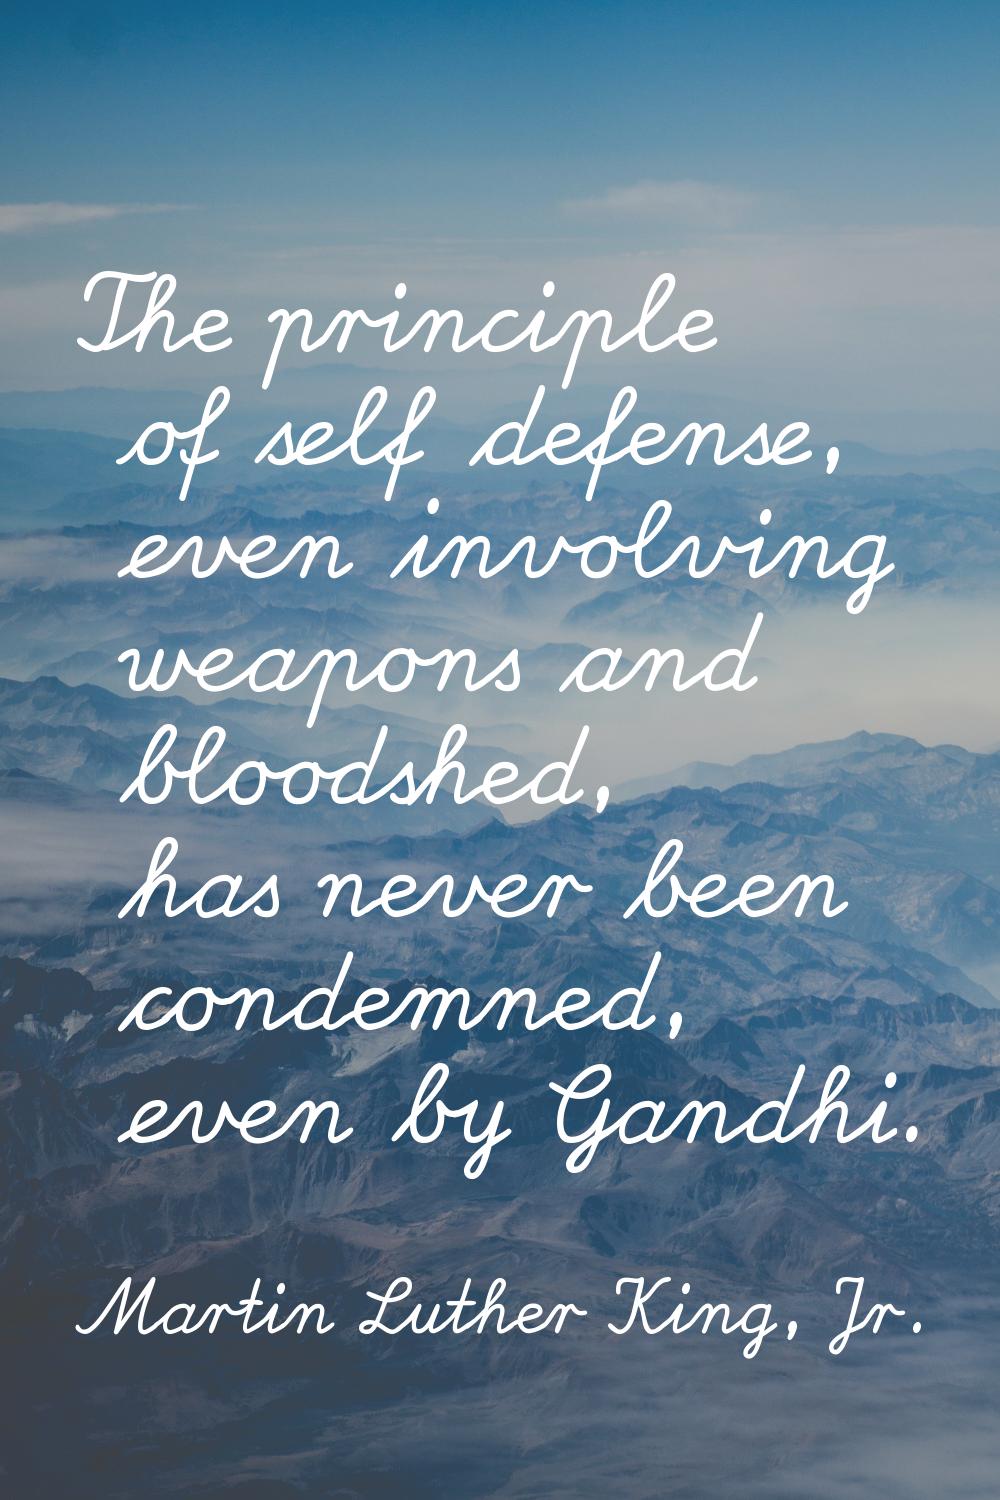 The principle of self defense, even involving weapons and bloodshed, has never been condemned, even